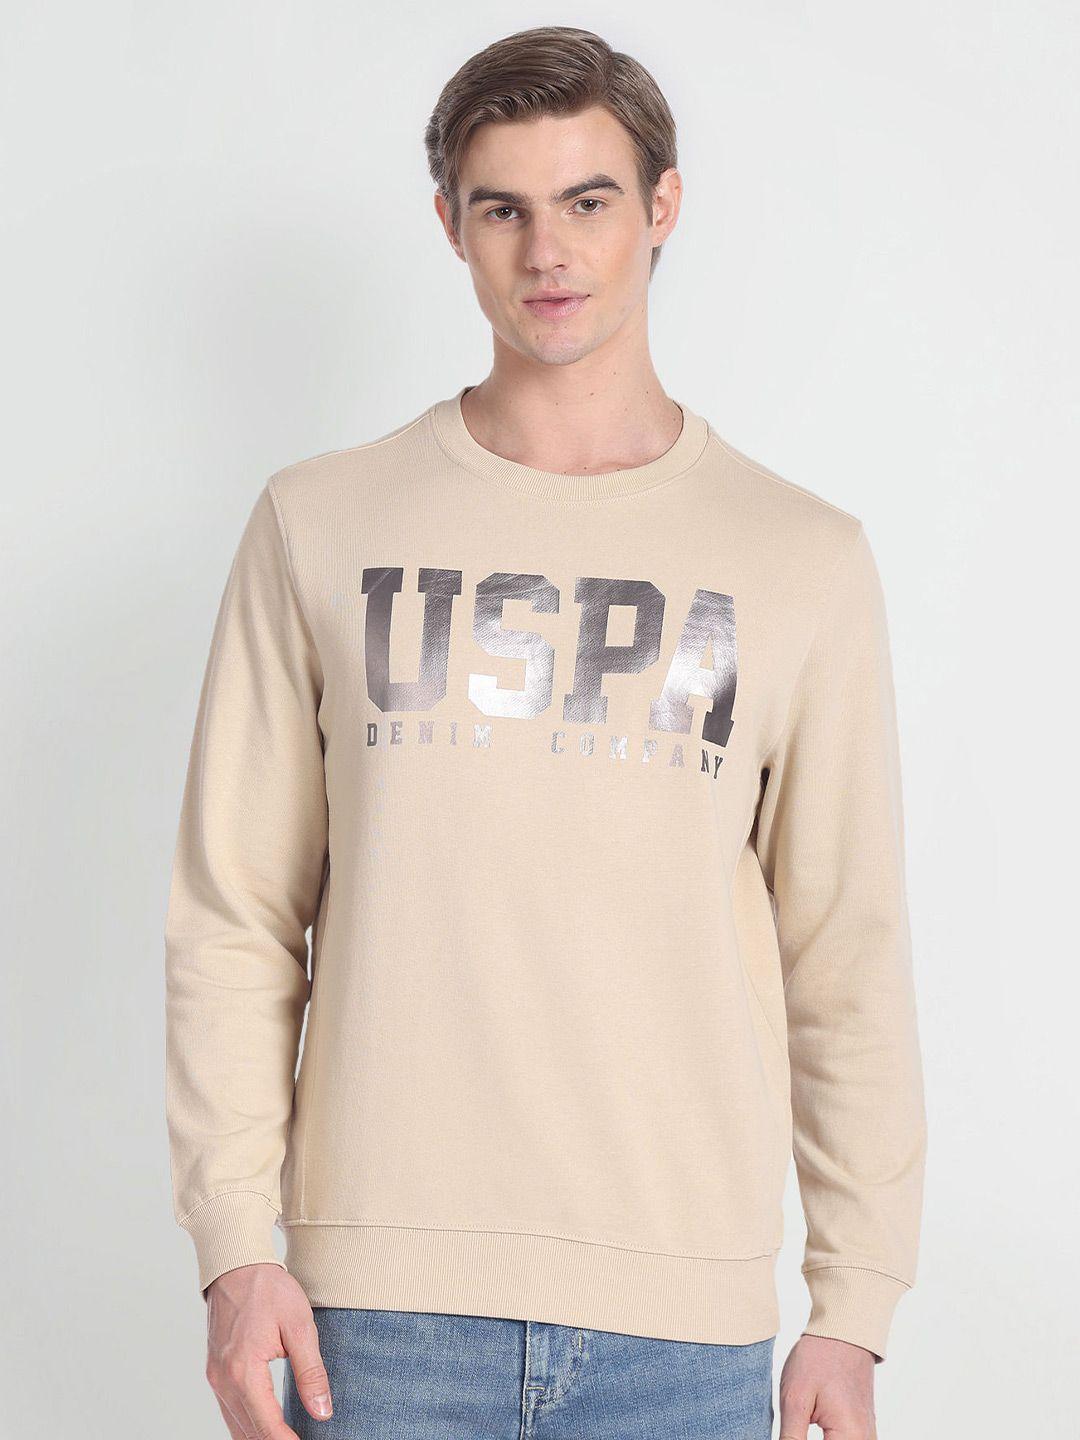 u.s. polo assn. denim co. typography printed pullover